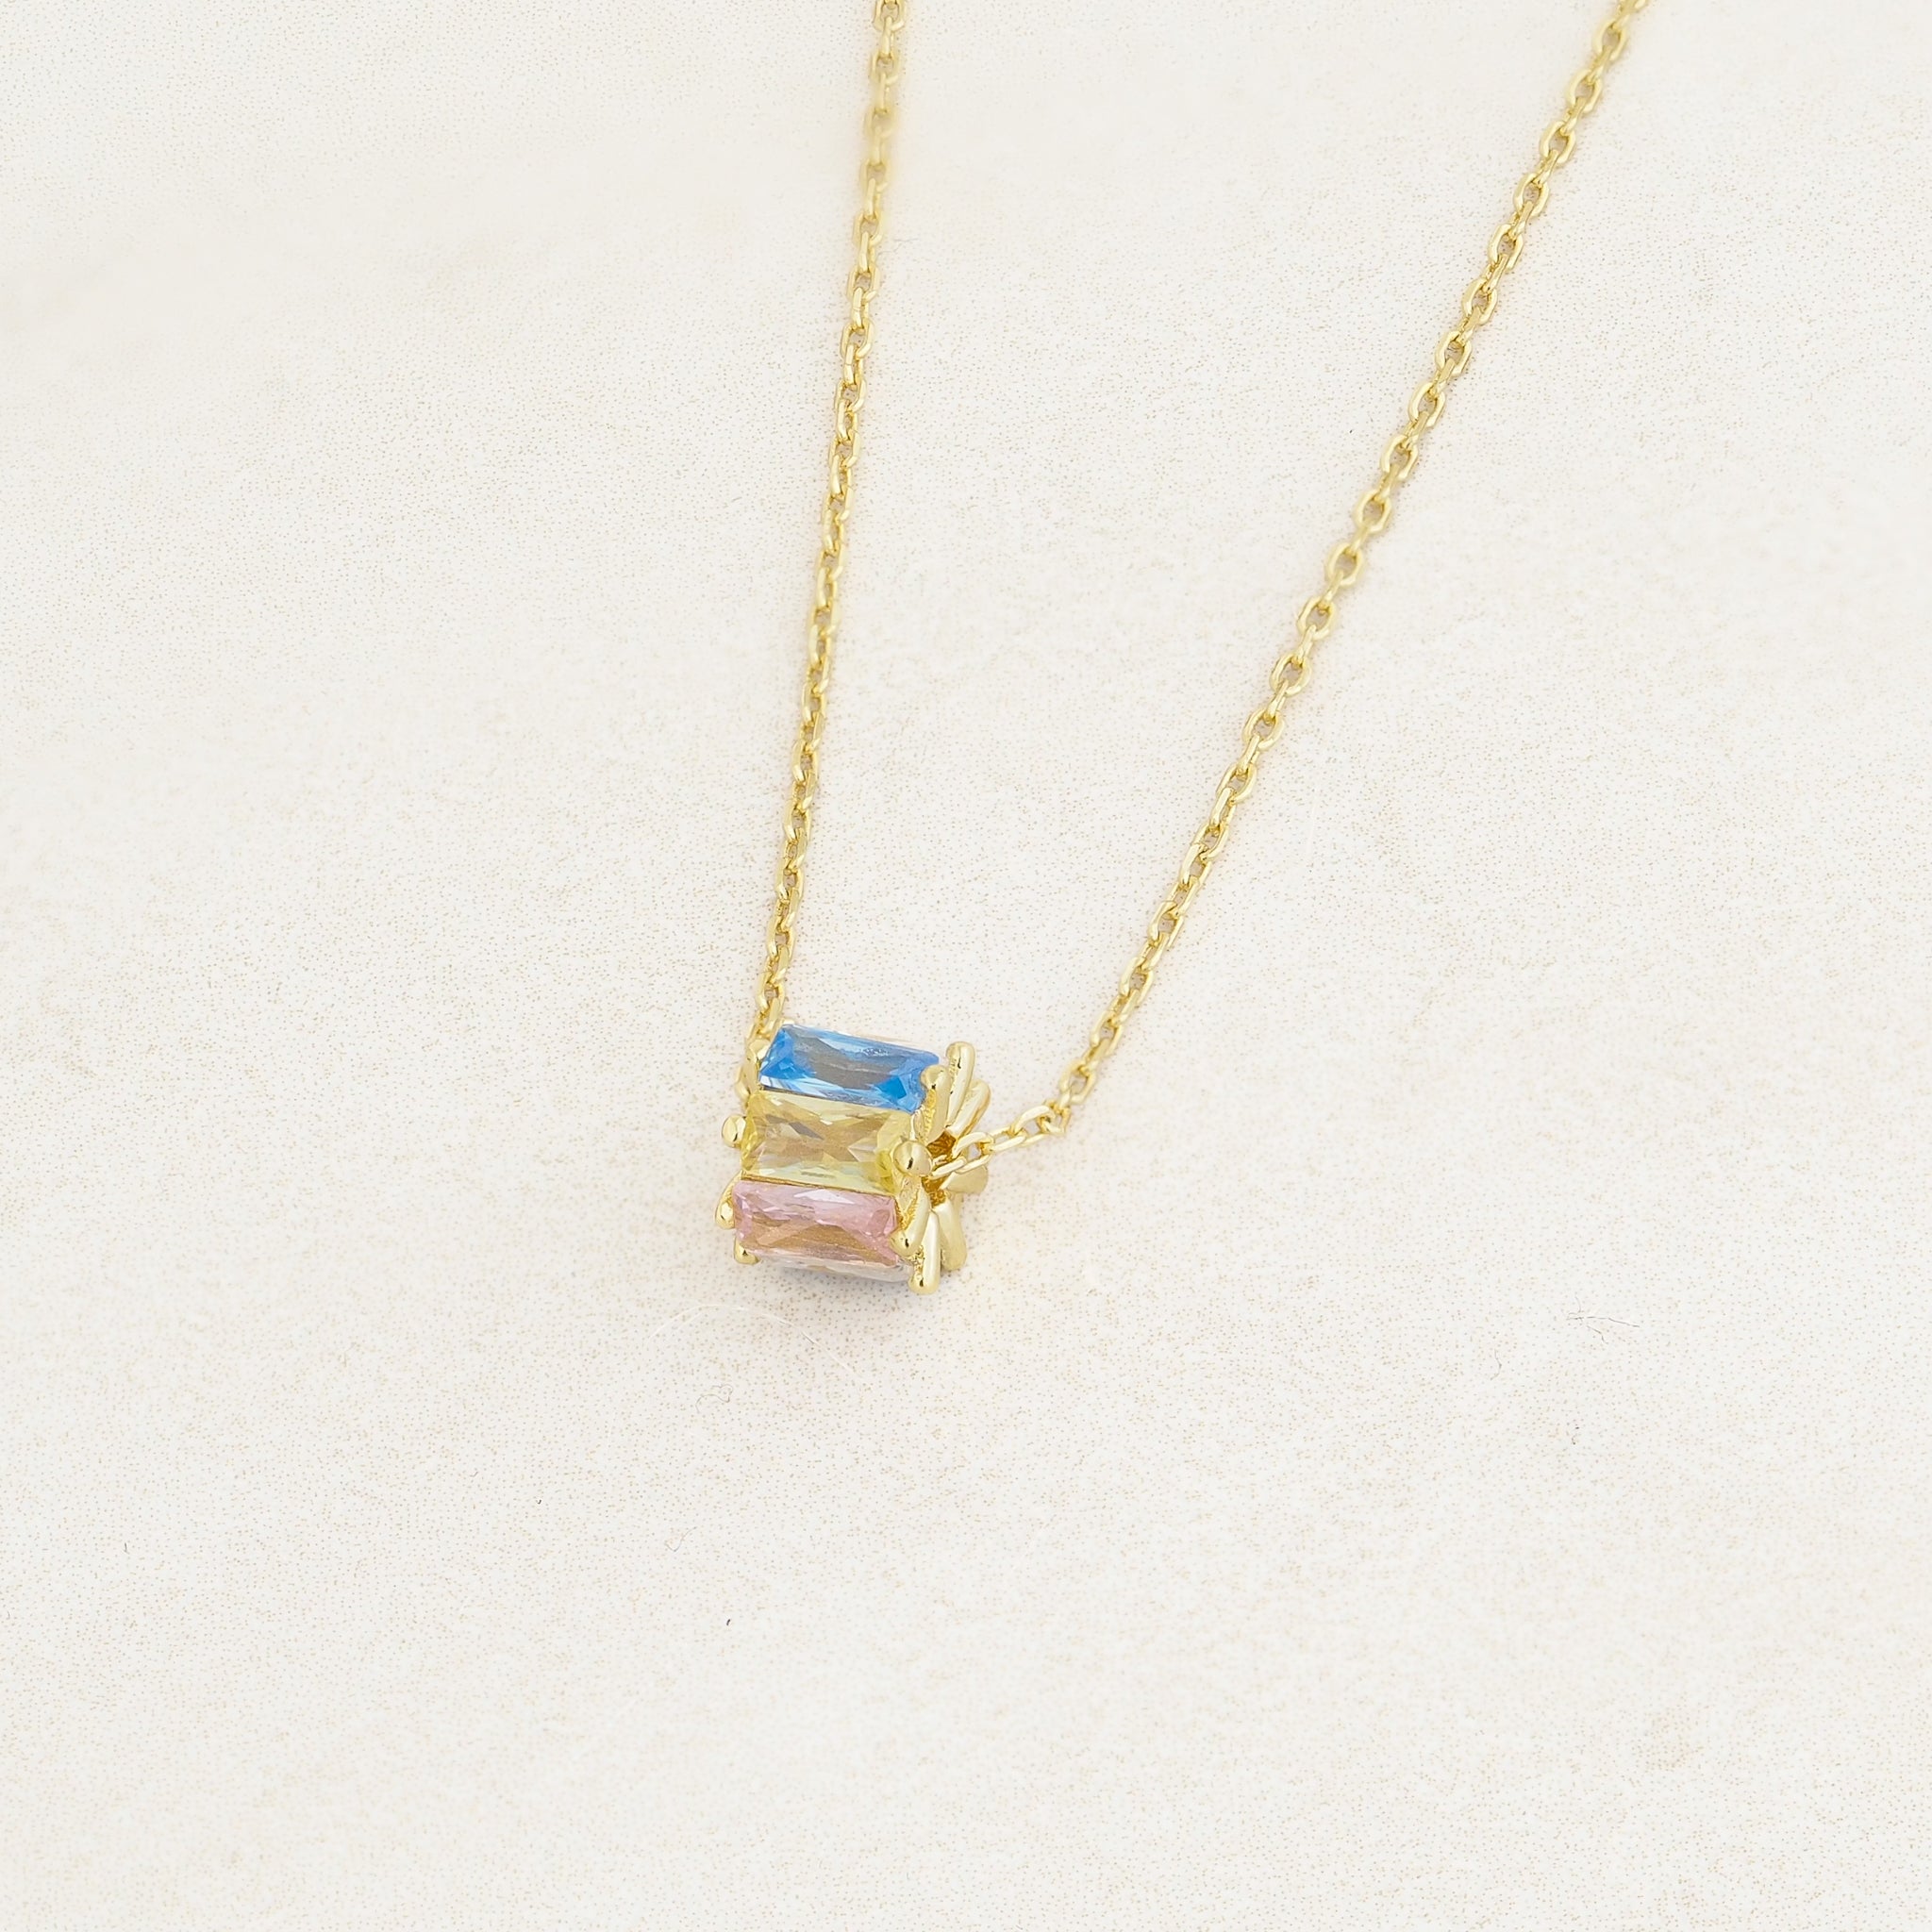 Pansexual revolve necklace featuring colours of the Pansexual flag, right